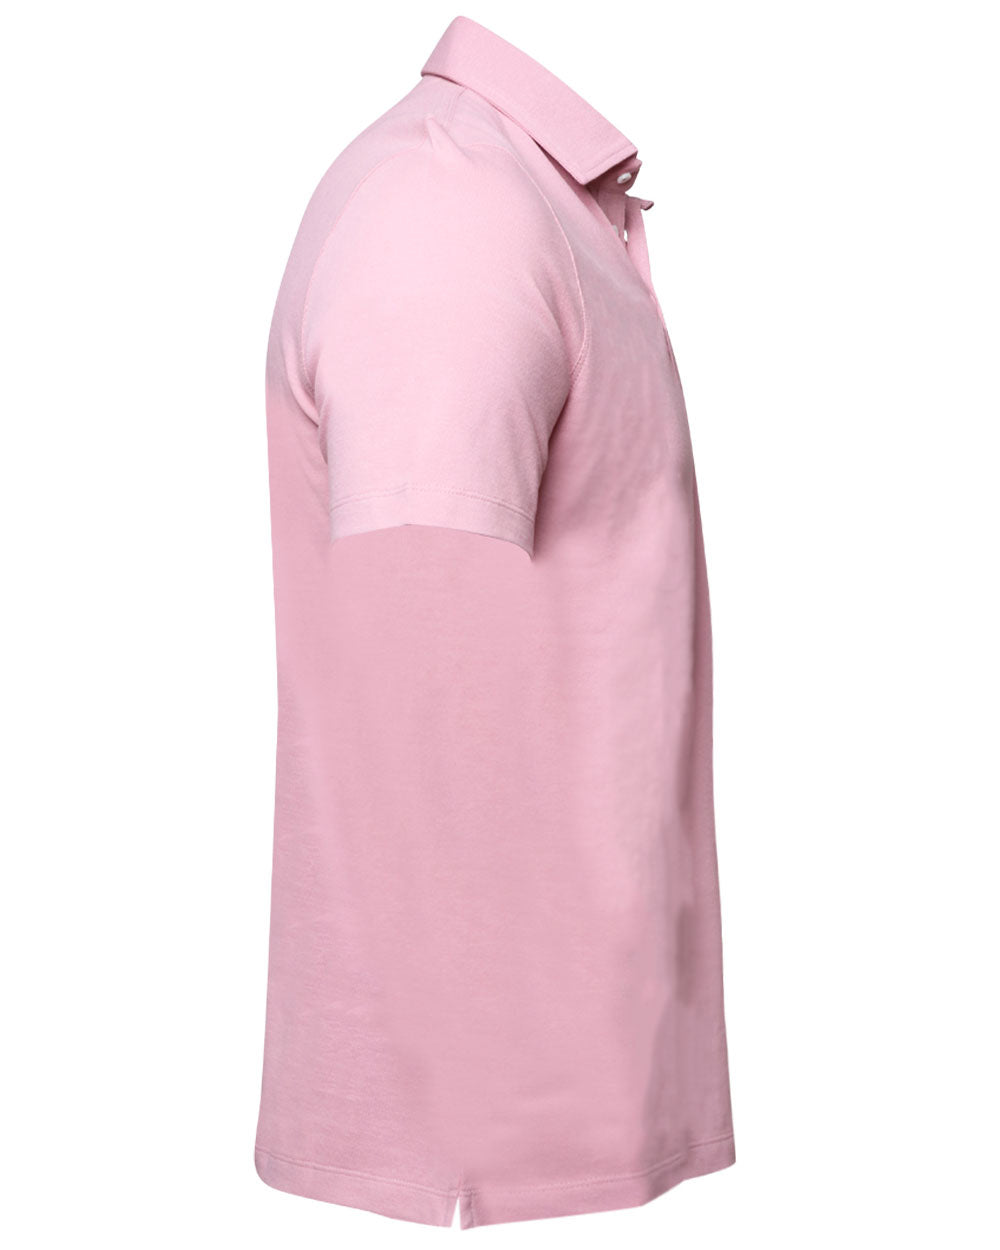 Rose Jersey Polo